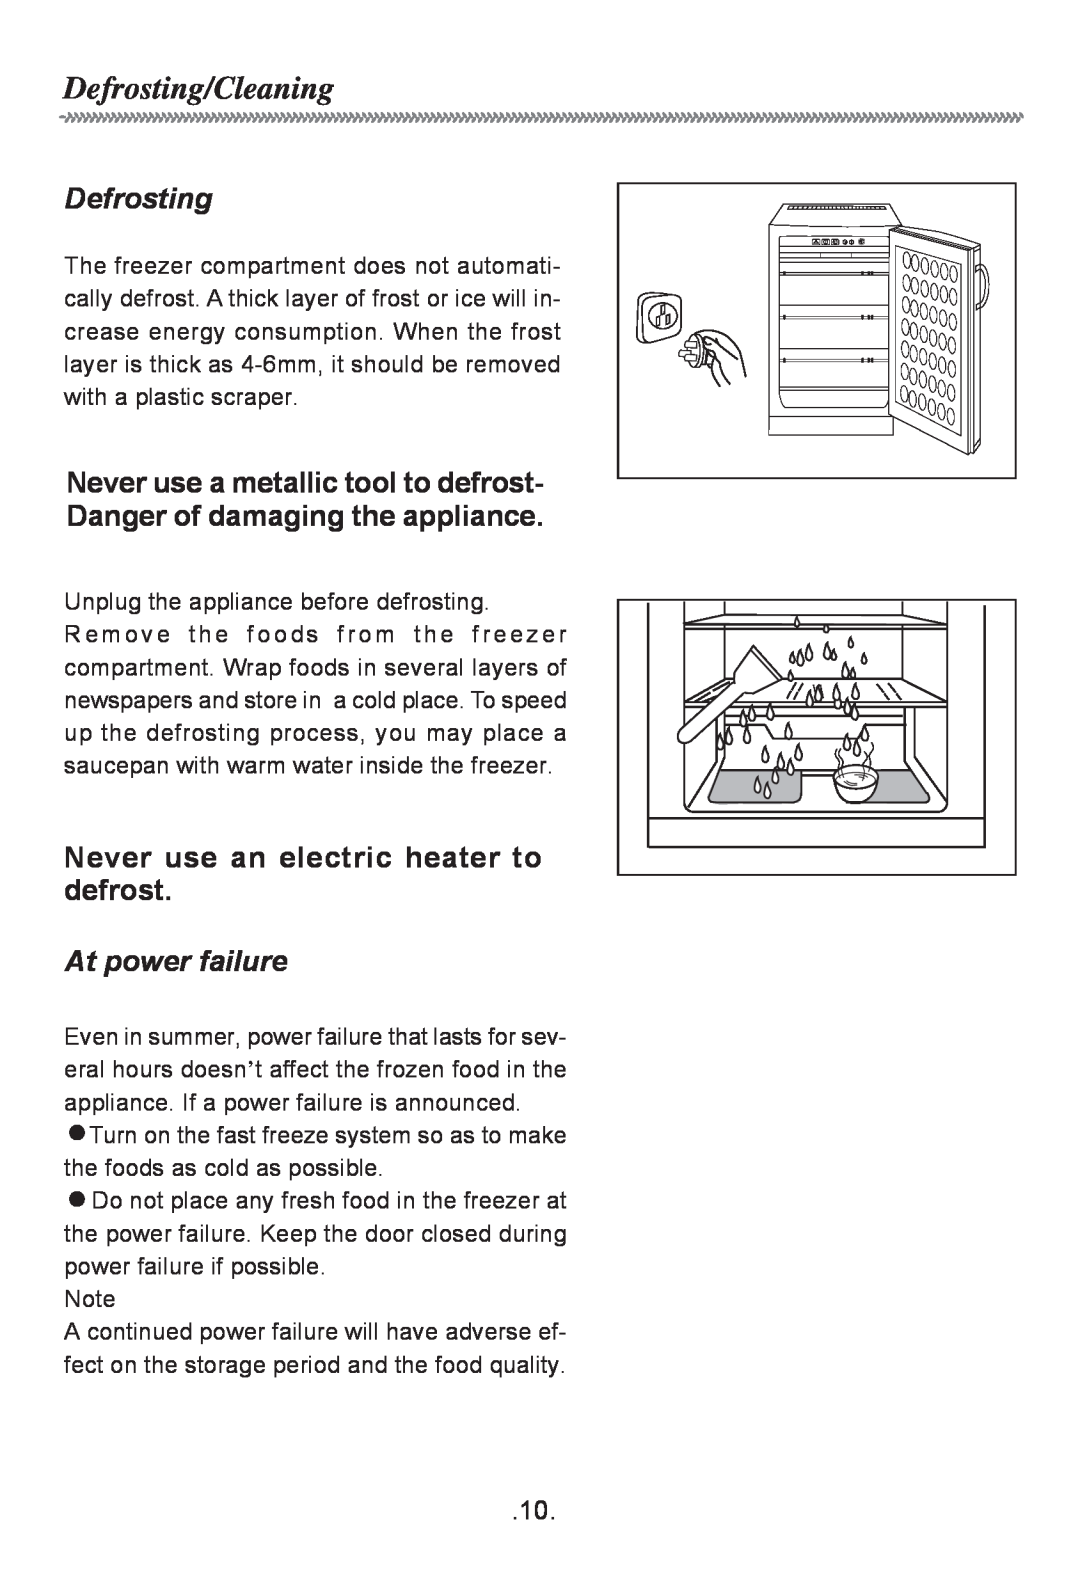 Haier HF-116R owner manual Defrosting/Cleaning, Never use an electric heater to defrost, At power failure 